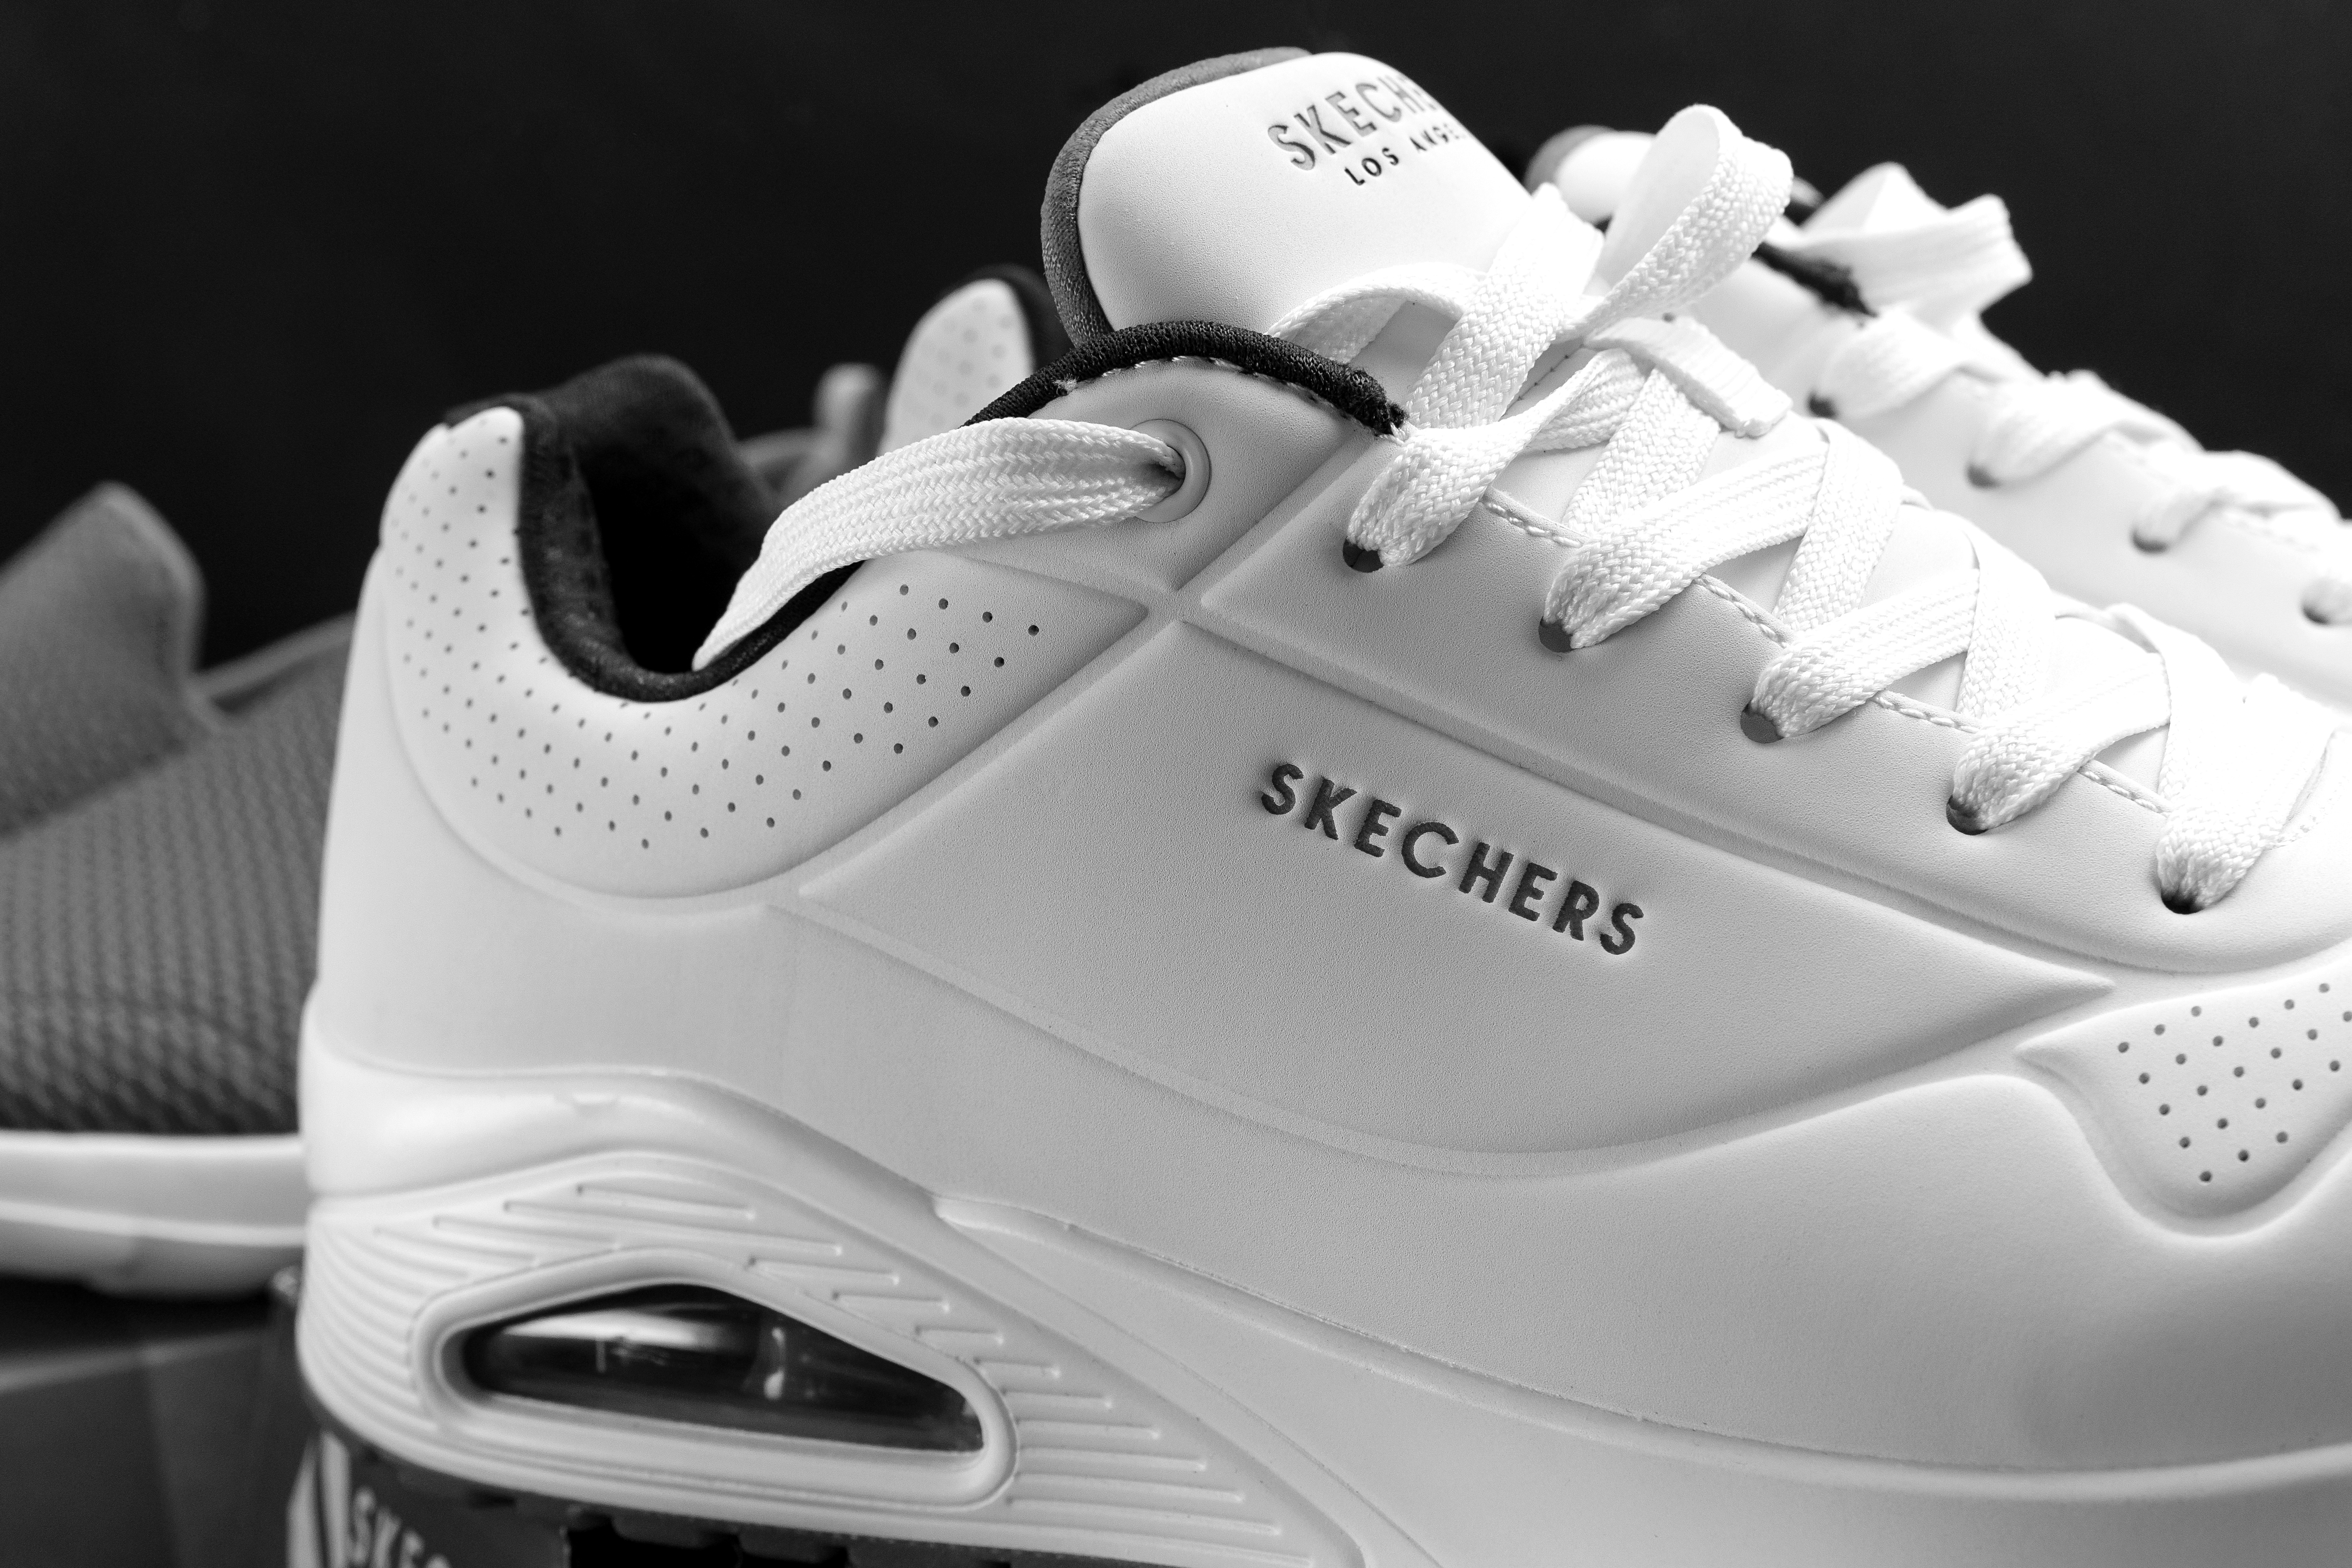 Skechers asks the question... To Disclose Or Not To Disclose?